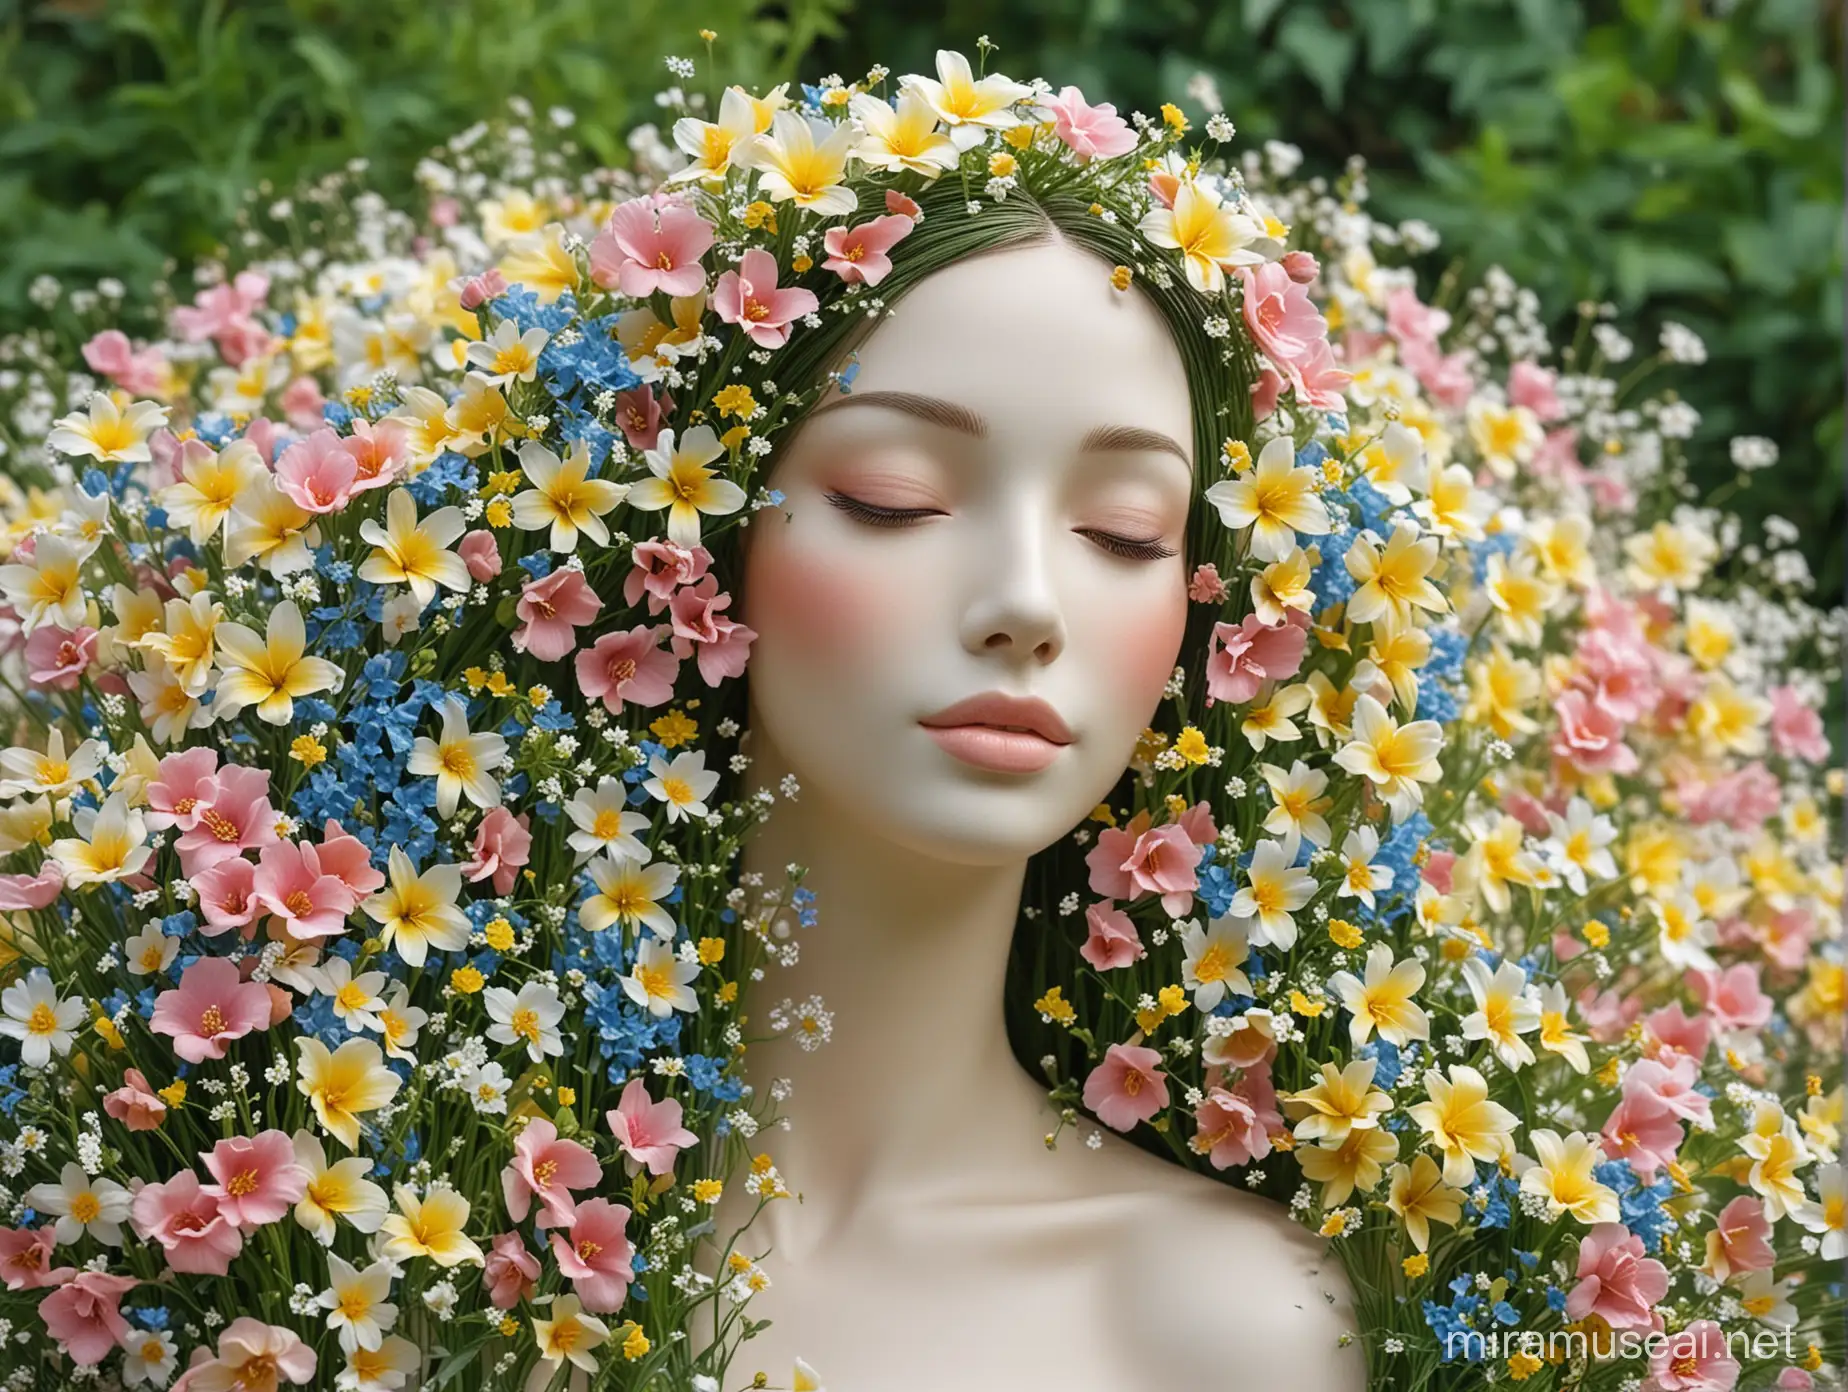 beautifully gentle woman, which is created by flowers, it is beautiful flower sculpture, green and yellow and pink and white and blue, it has perfect face from small flowers and posture, the woman is dancig in the nature 